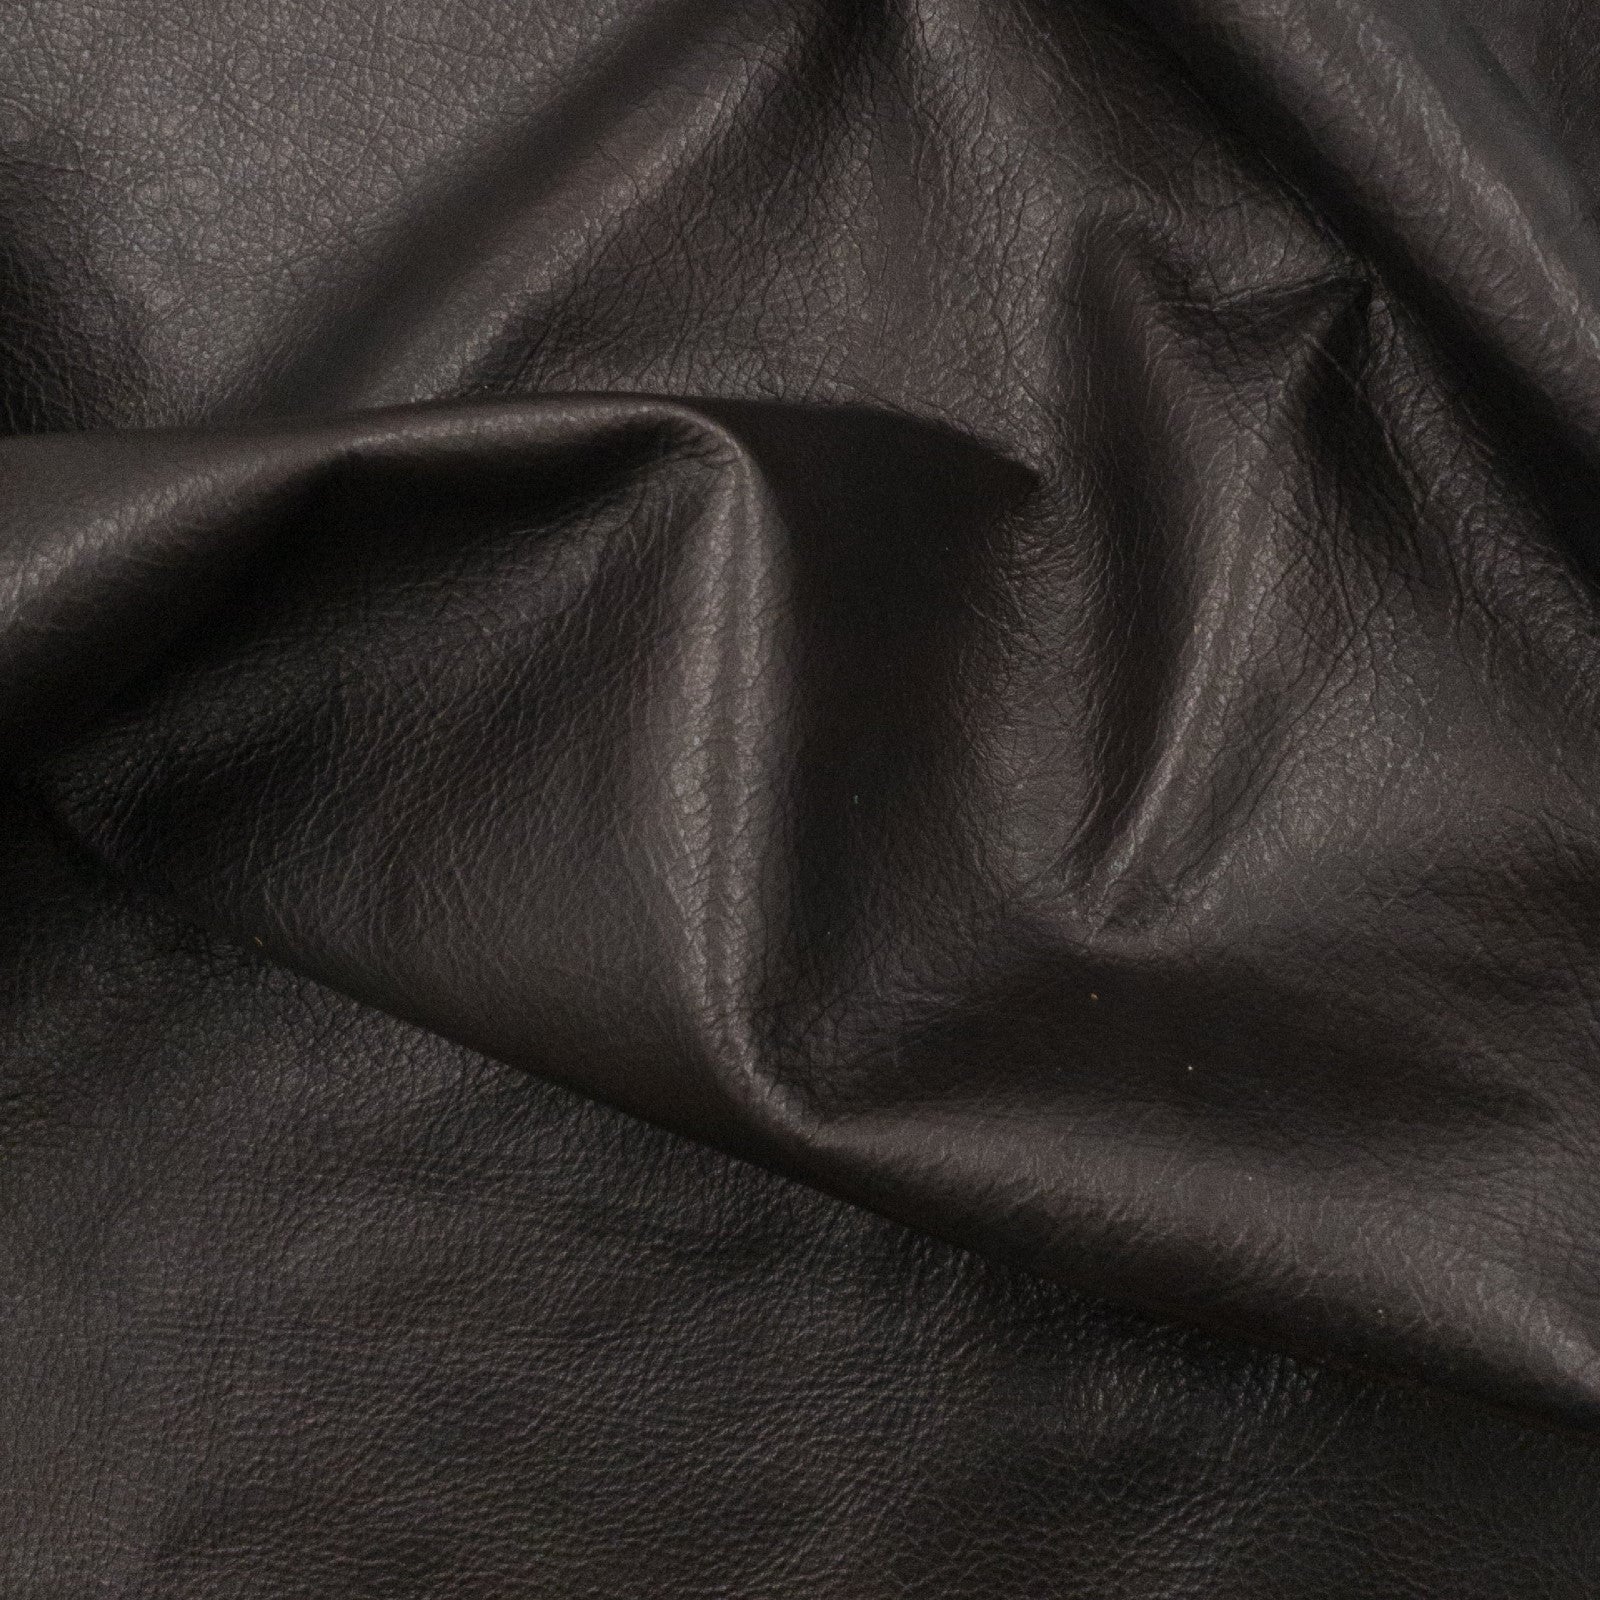 Dark Brown, 2-4 oz, 3-10 Sq Ft, Upholstery Cow Project Pieces, Dark Brown (2-3 oz) / 7-10 Sq Ft | The Leather Guy